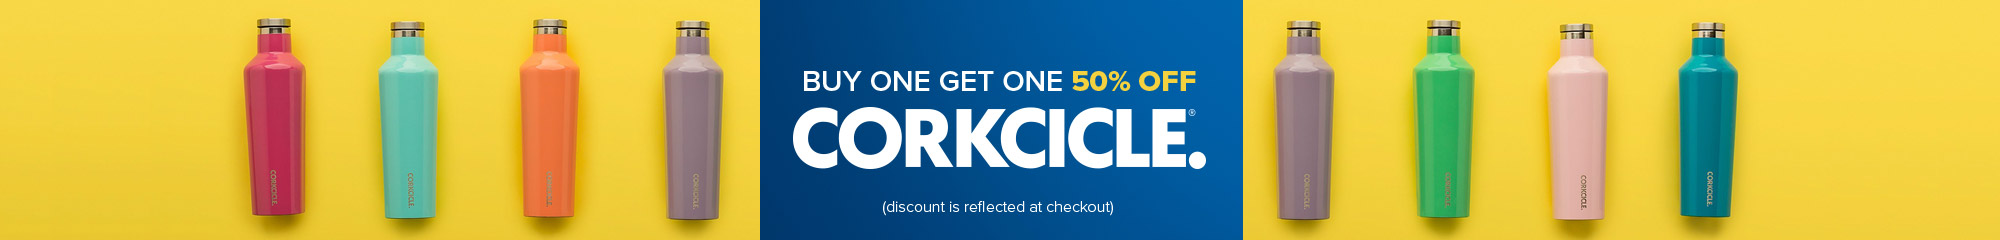 Buy One Get One 50% Off Corkcicle Drinkware